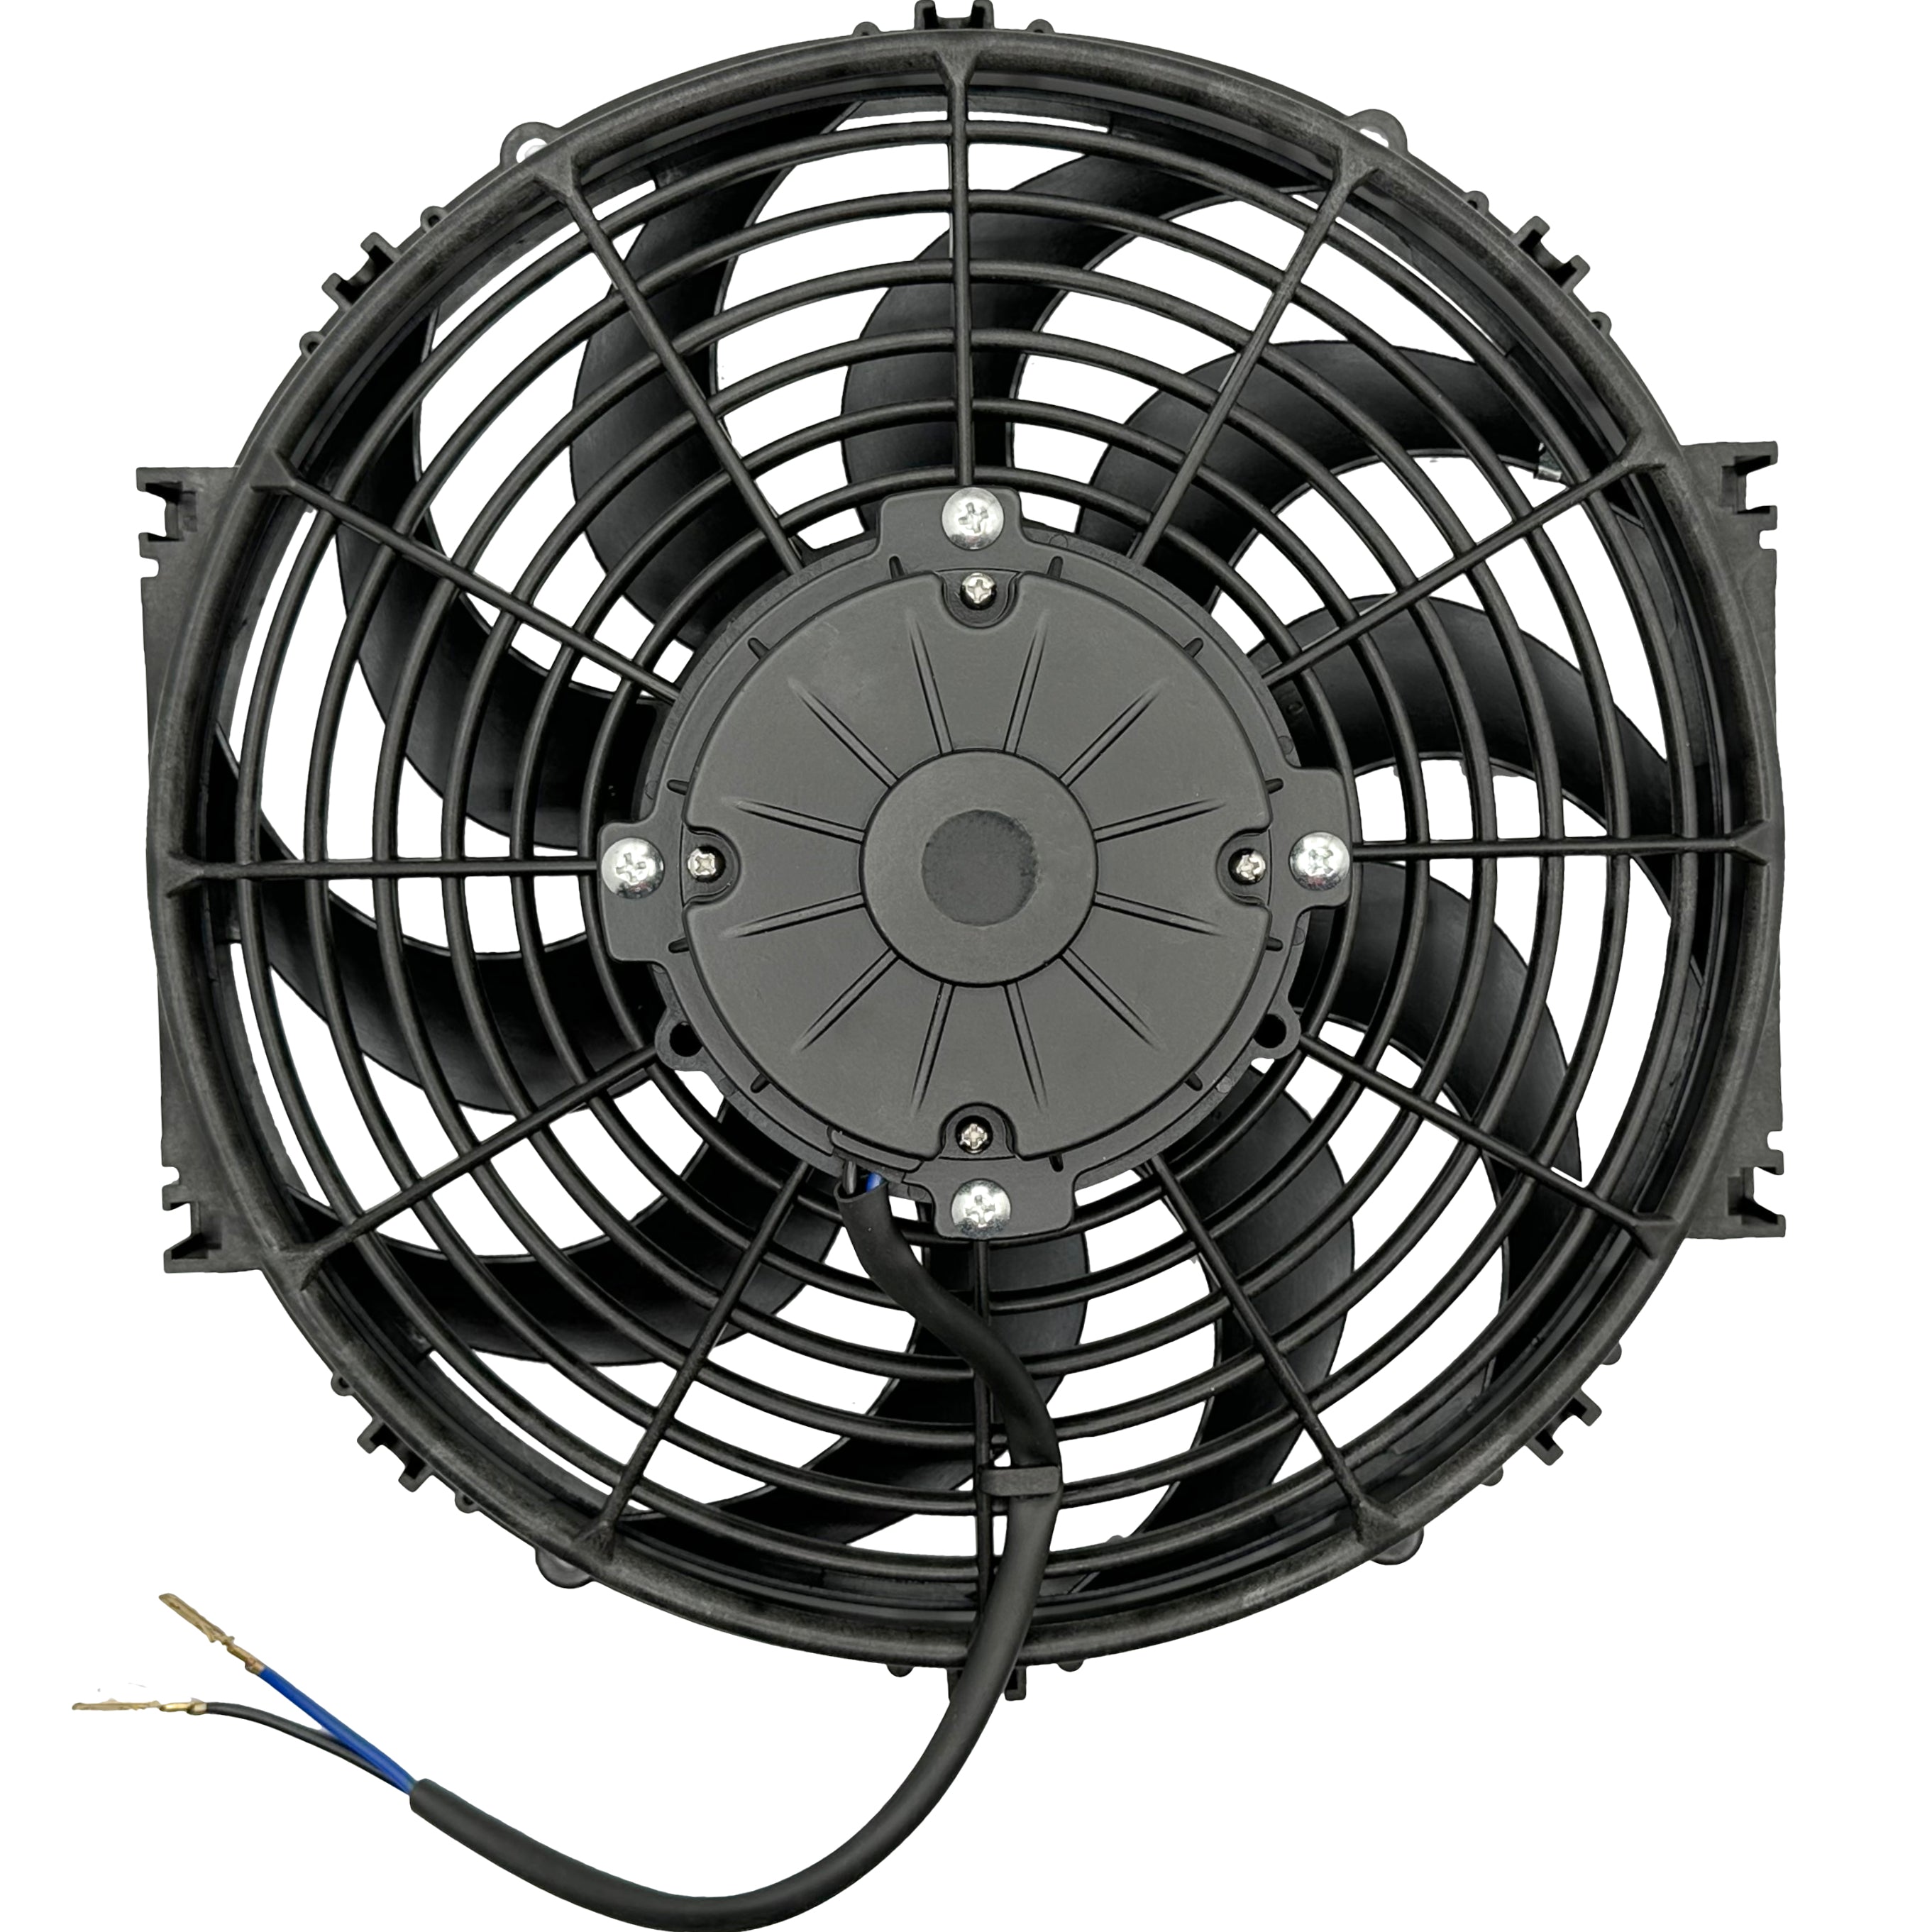 American Volt Dual 12 Inch Automotive Electric Engine Radiator Cooling  Fans Upgraded 90W Motor 180'F Push-in Fin Probe Thermostat Sensor Switch  Kit